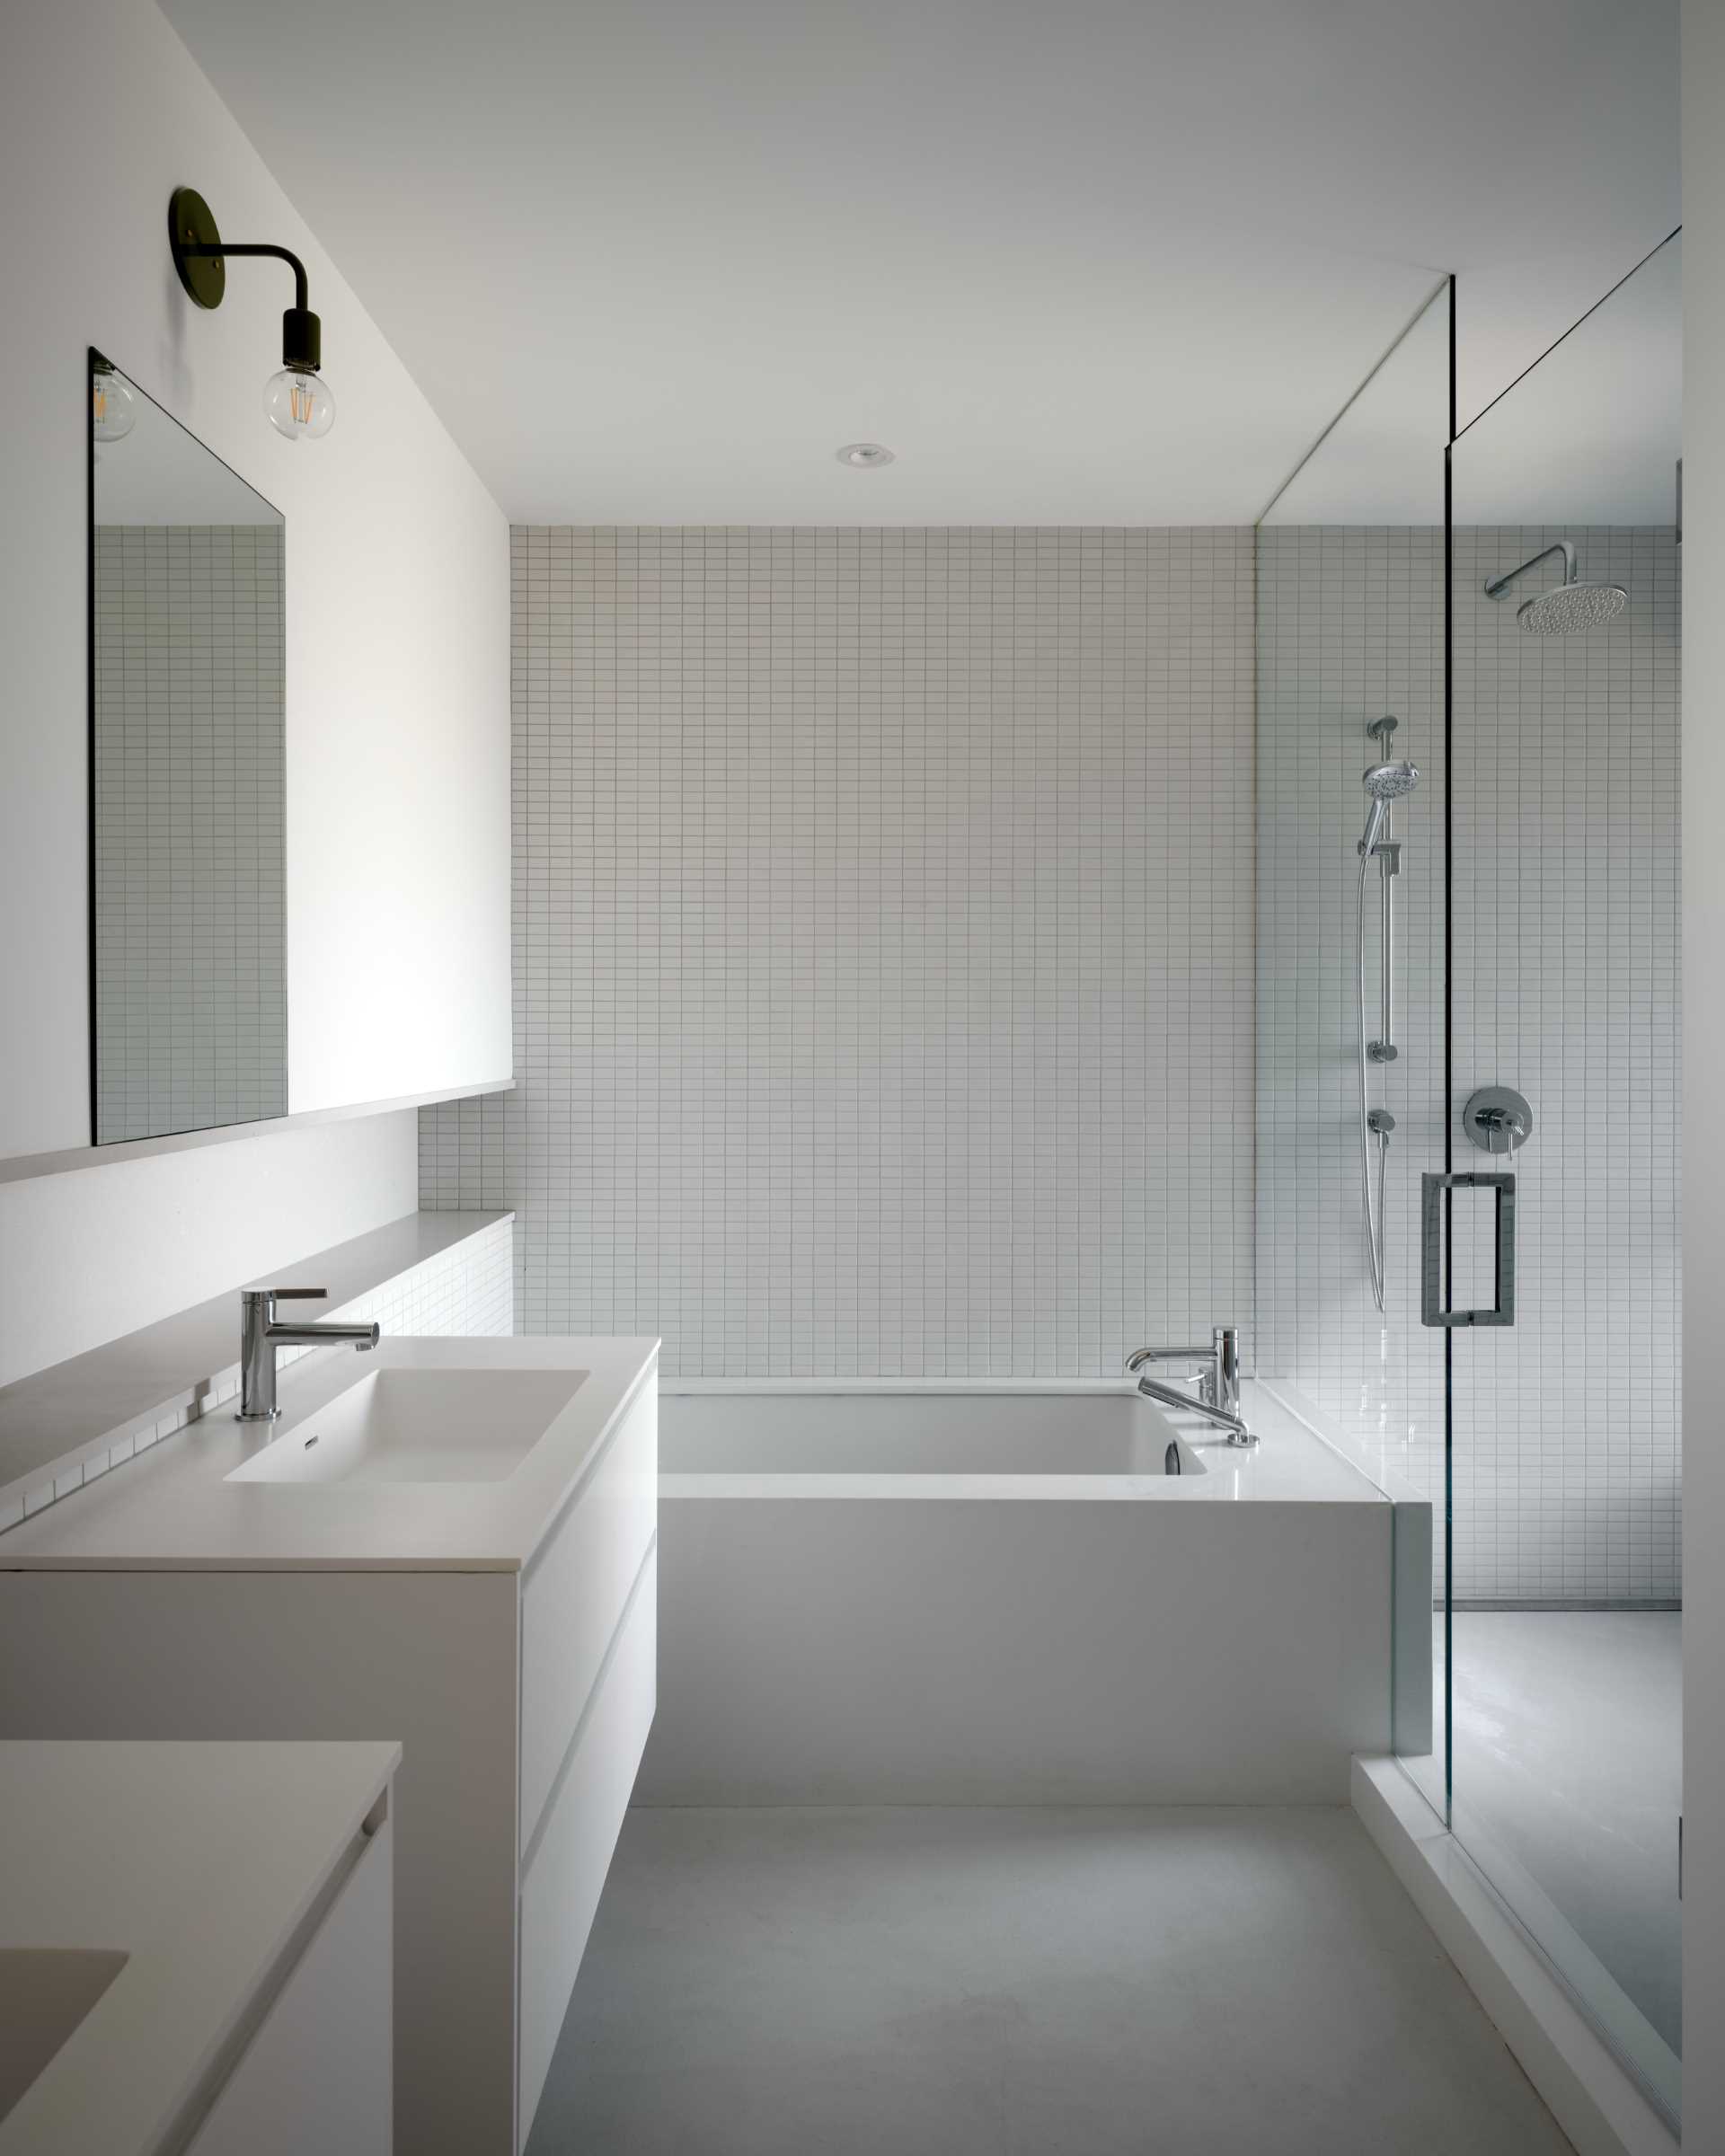 A modern bathroom has a built-in bathtub with a wall of tiles that continue through to the shower.